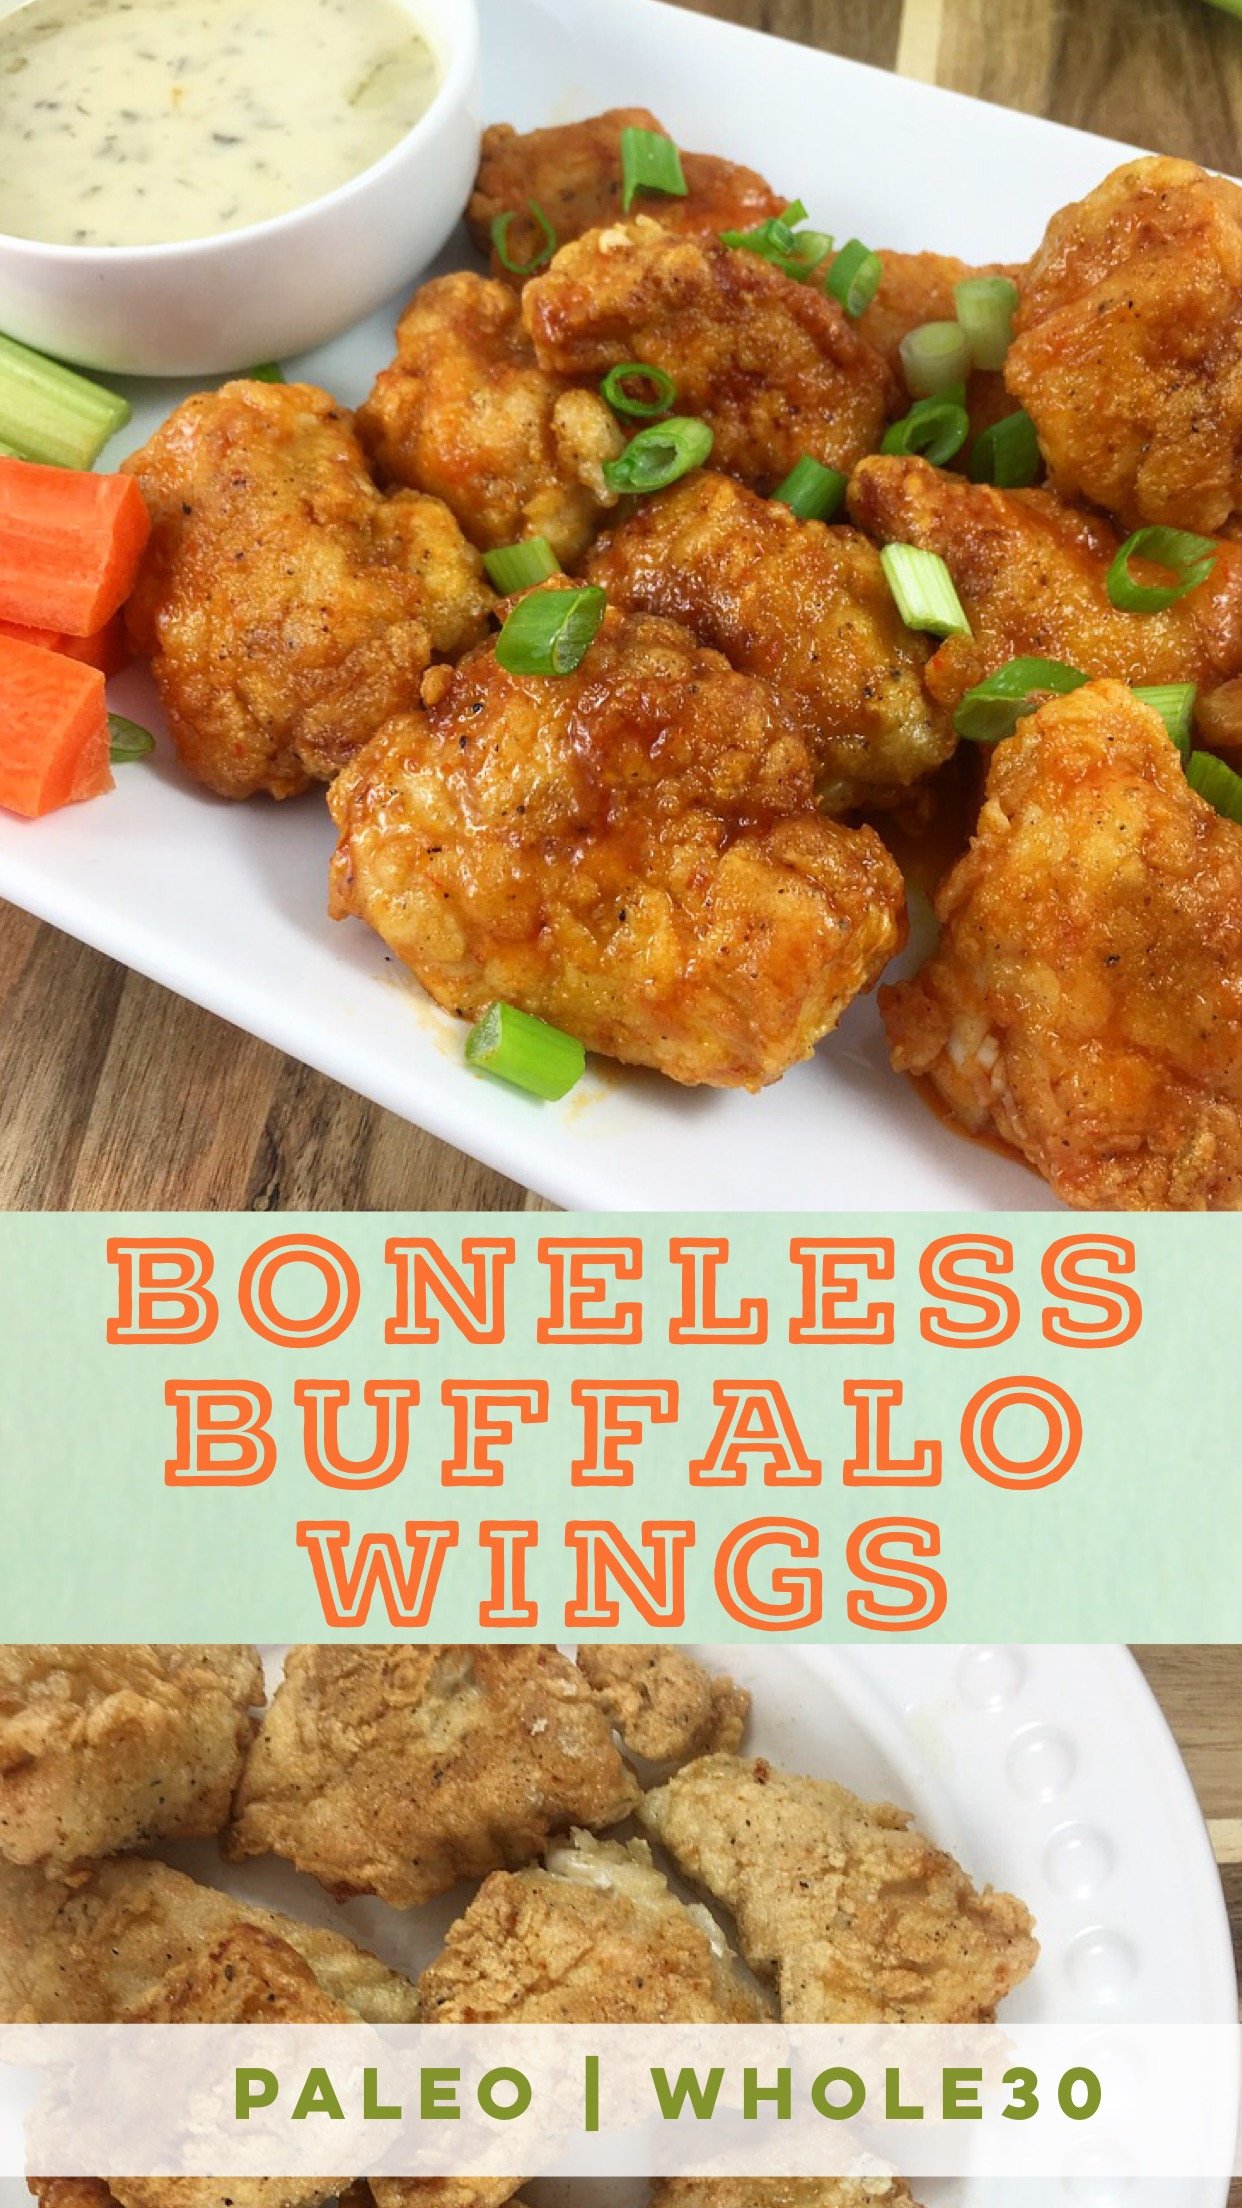 These Paleo and Whole30 boneless buffalo wings are the perfect gluten free appetizer, game day recipe, or family friendly boneless buffalo wing recipe. They're better than take out or the local wing restaurant, and healthier too! This Whole30 chicken wing recipe is going to be a new favorite! #paleobonelesswings #whole30chickenwings #whole30bonelesswings